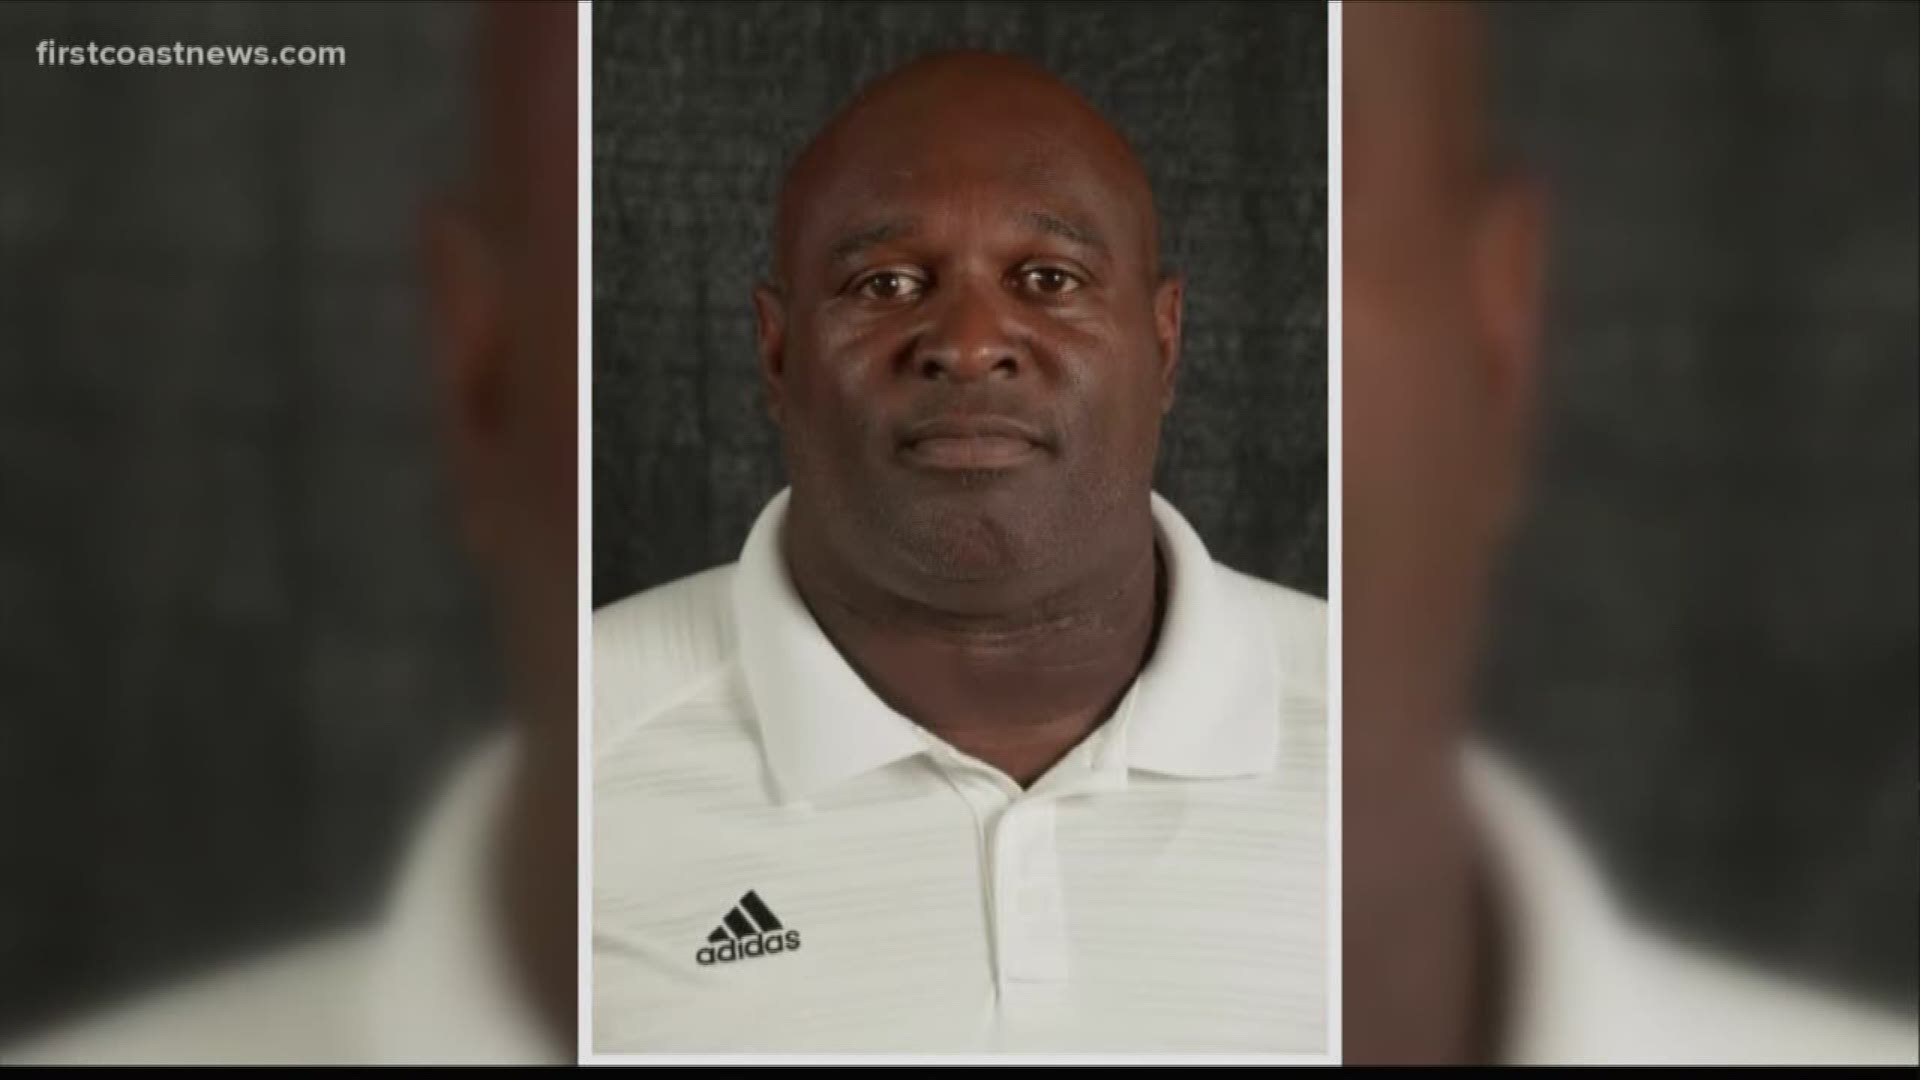 The district made the announcement this past weekend that due to an internal investigation he was moved as head football coach at Ribault High School.